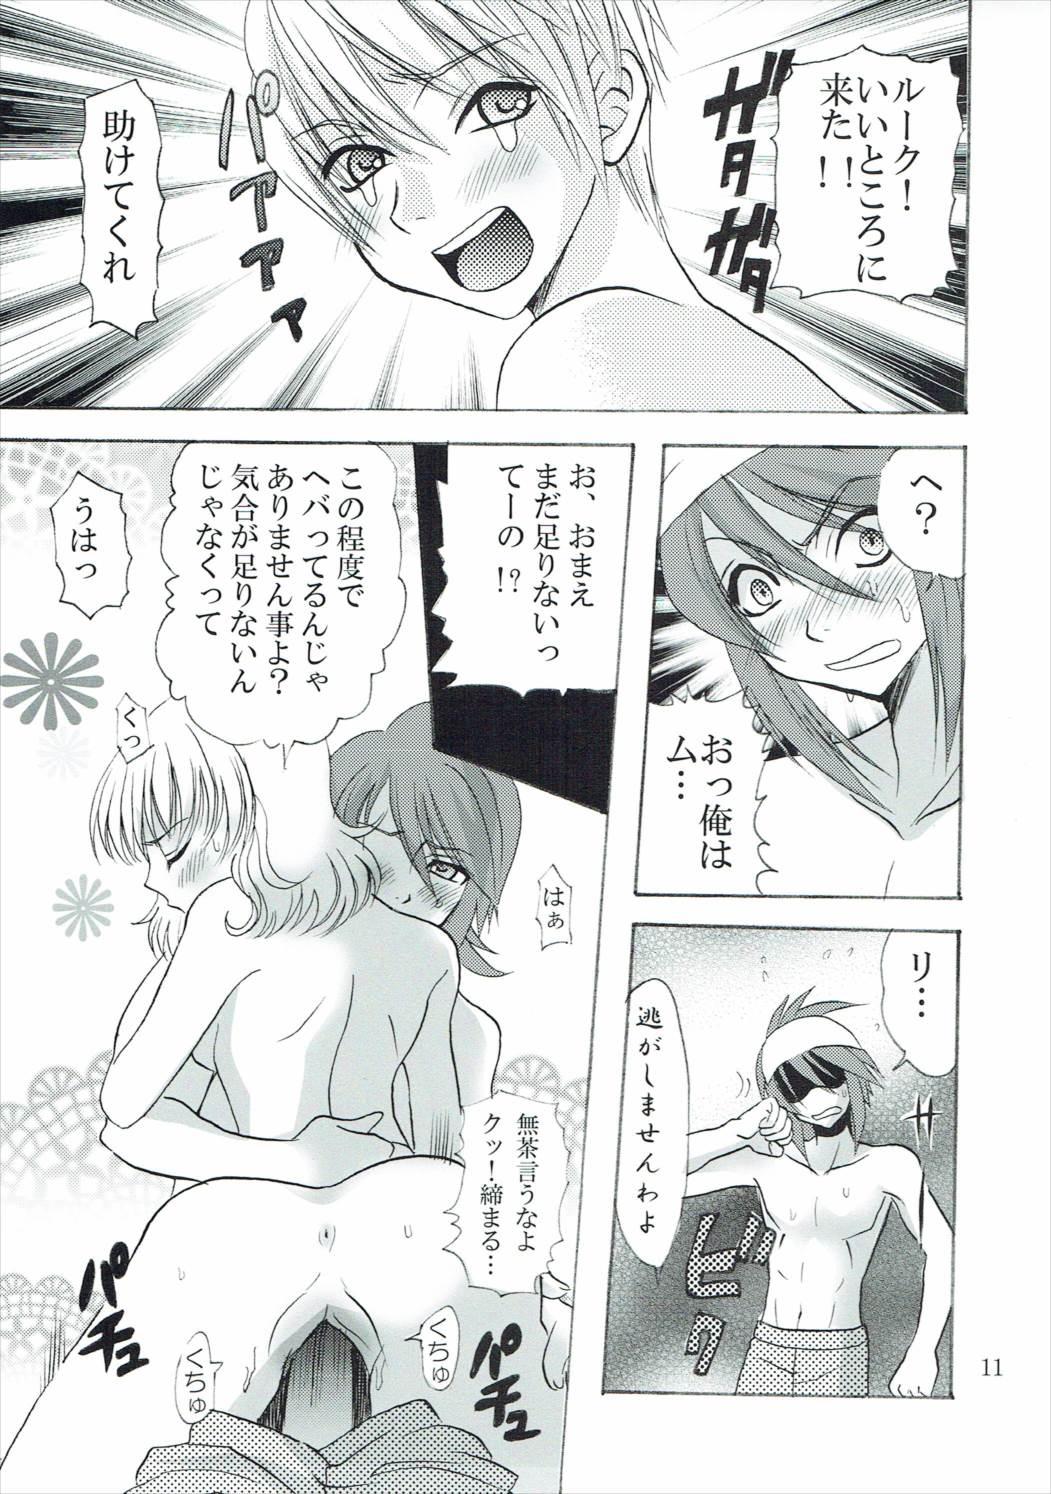 Chat 興味津々お年頃 - Tales of the abyss Arrecha - Page 10